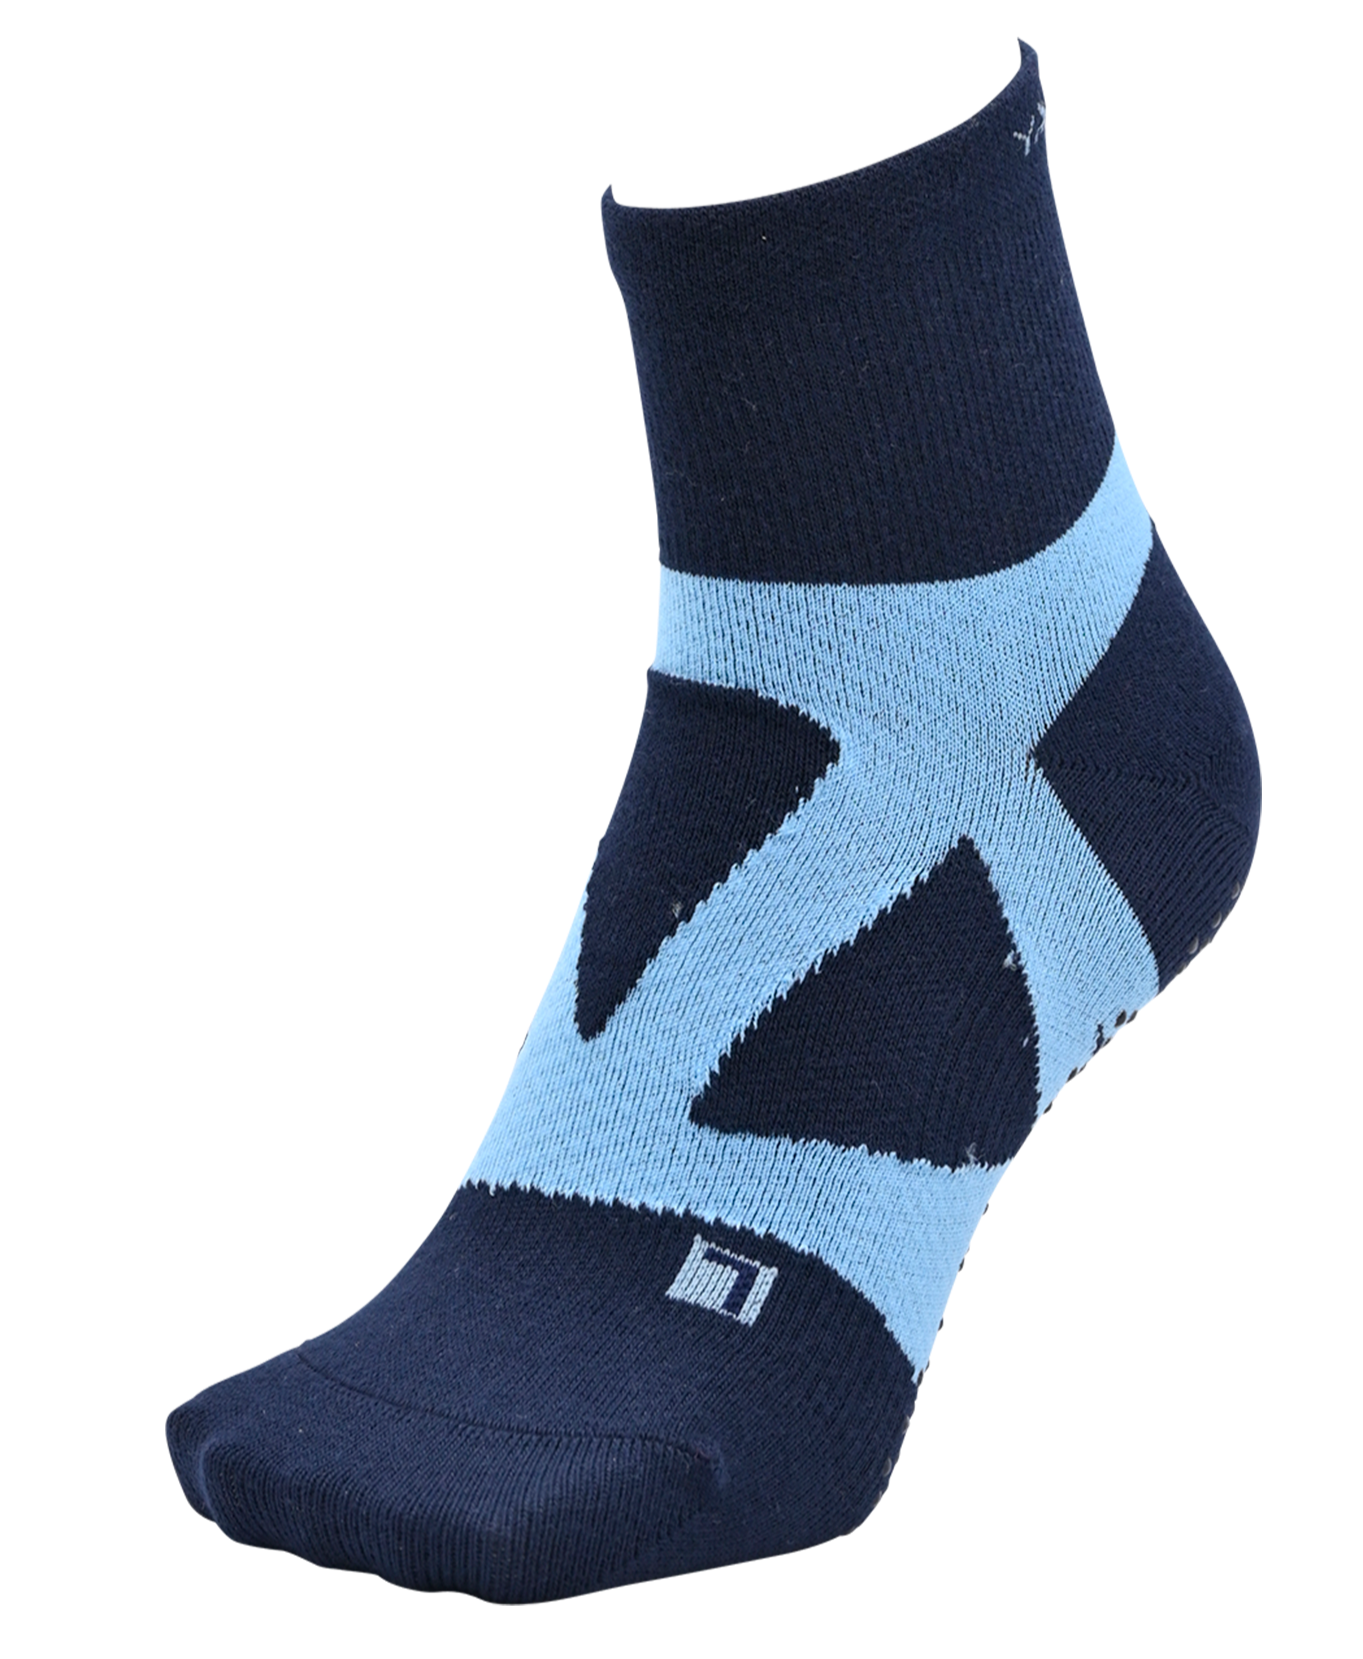 YAMAtune - Spider-Arch Compression - Mid-Length Socks - Non-Slip Dots - Navy/Blue